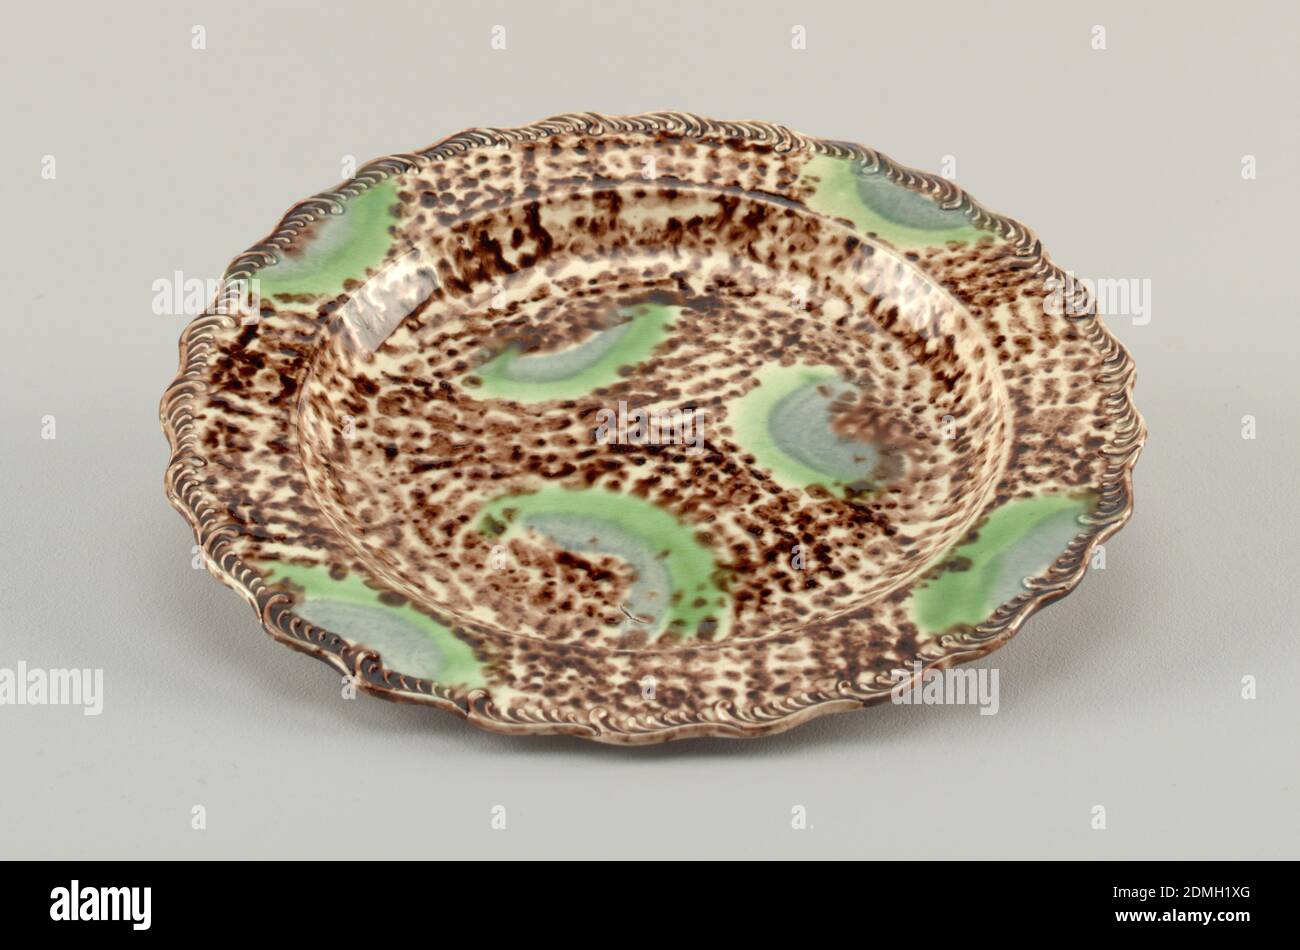 Plate, Thomas Wieldon Factory, English, Lead-glazed earthenware, Plate with wavy border, brown speckled pattern with green and light bluish-grey biomorphic shapes., England, ca. 1760, ceramics, Decorative Arts, Plate Stock Photo